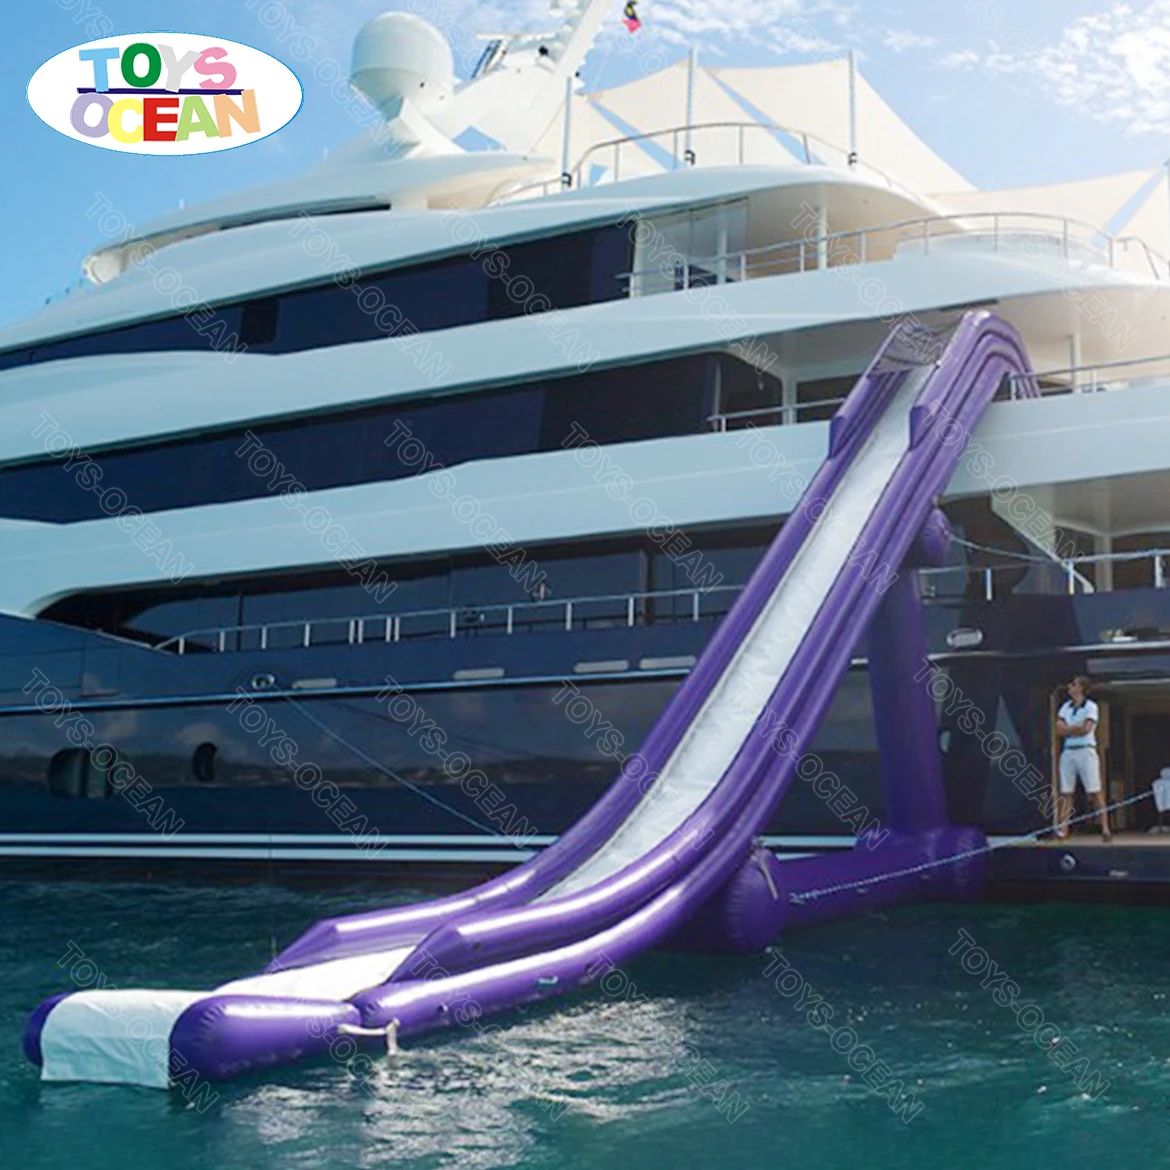 

2022 new customized inflatable floating water yacht slide for house boat